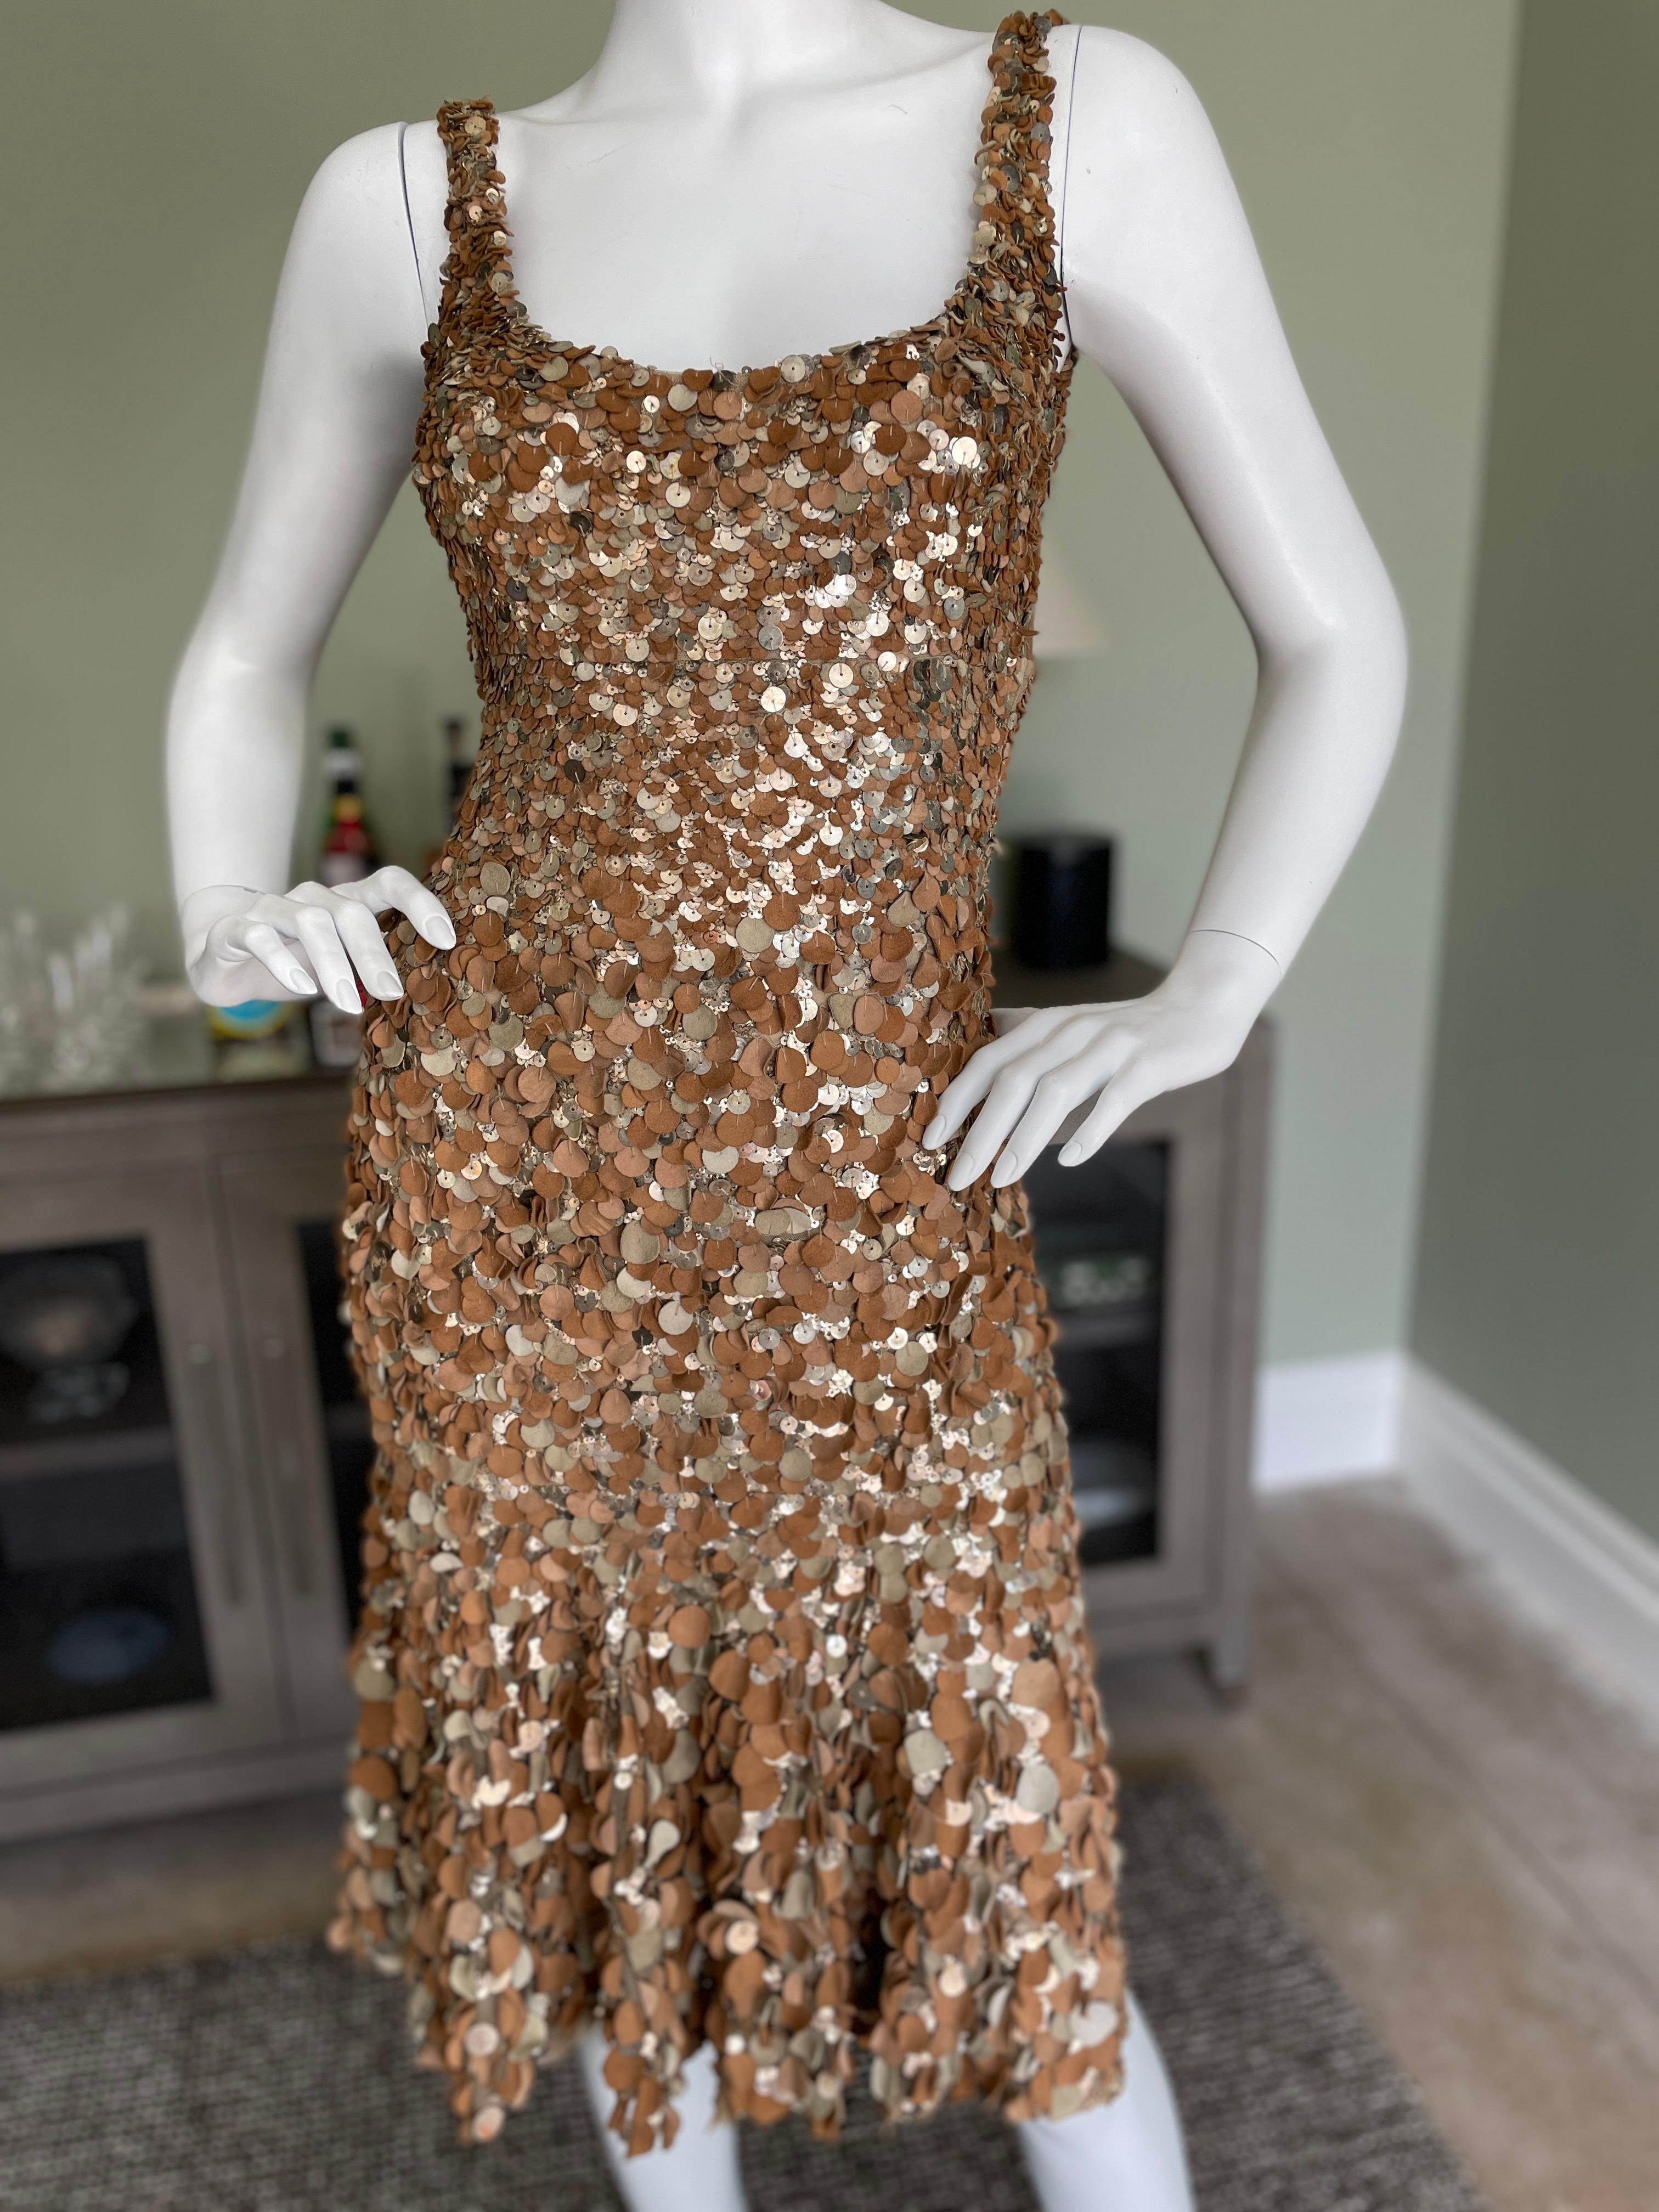 Donna Karan Vintage Cocktail Dress w Leather and Metal Fish Scale Sequin Details
  This is so pretty. metal and suede fish scale sequins, really remarkable workmanship.
 Size M
 Bust 36